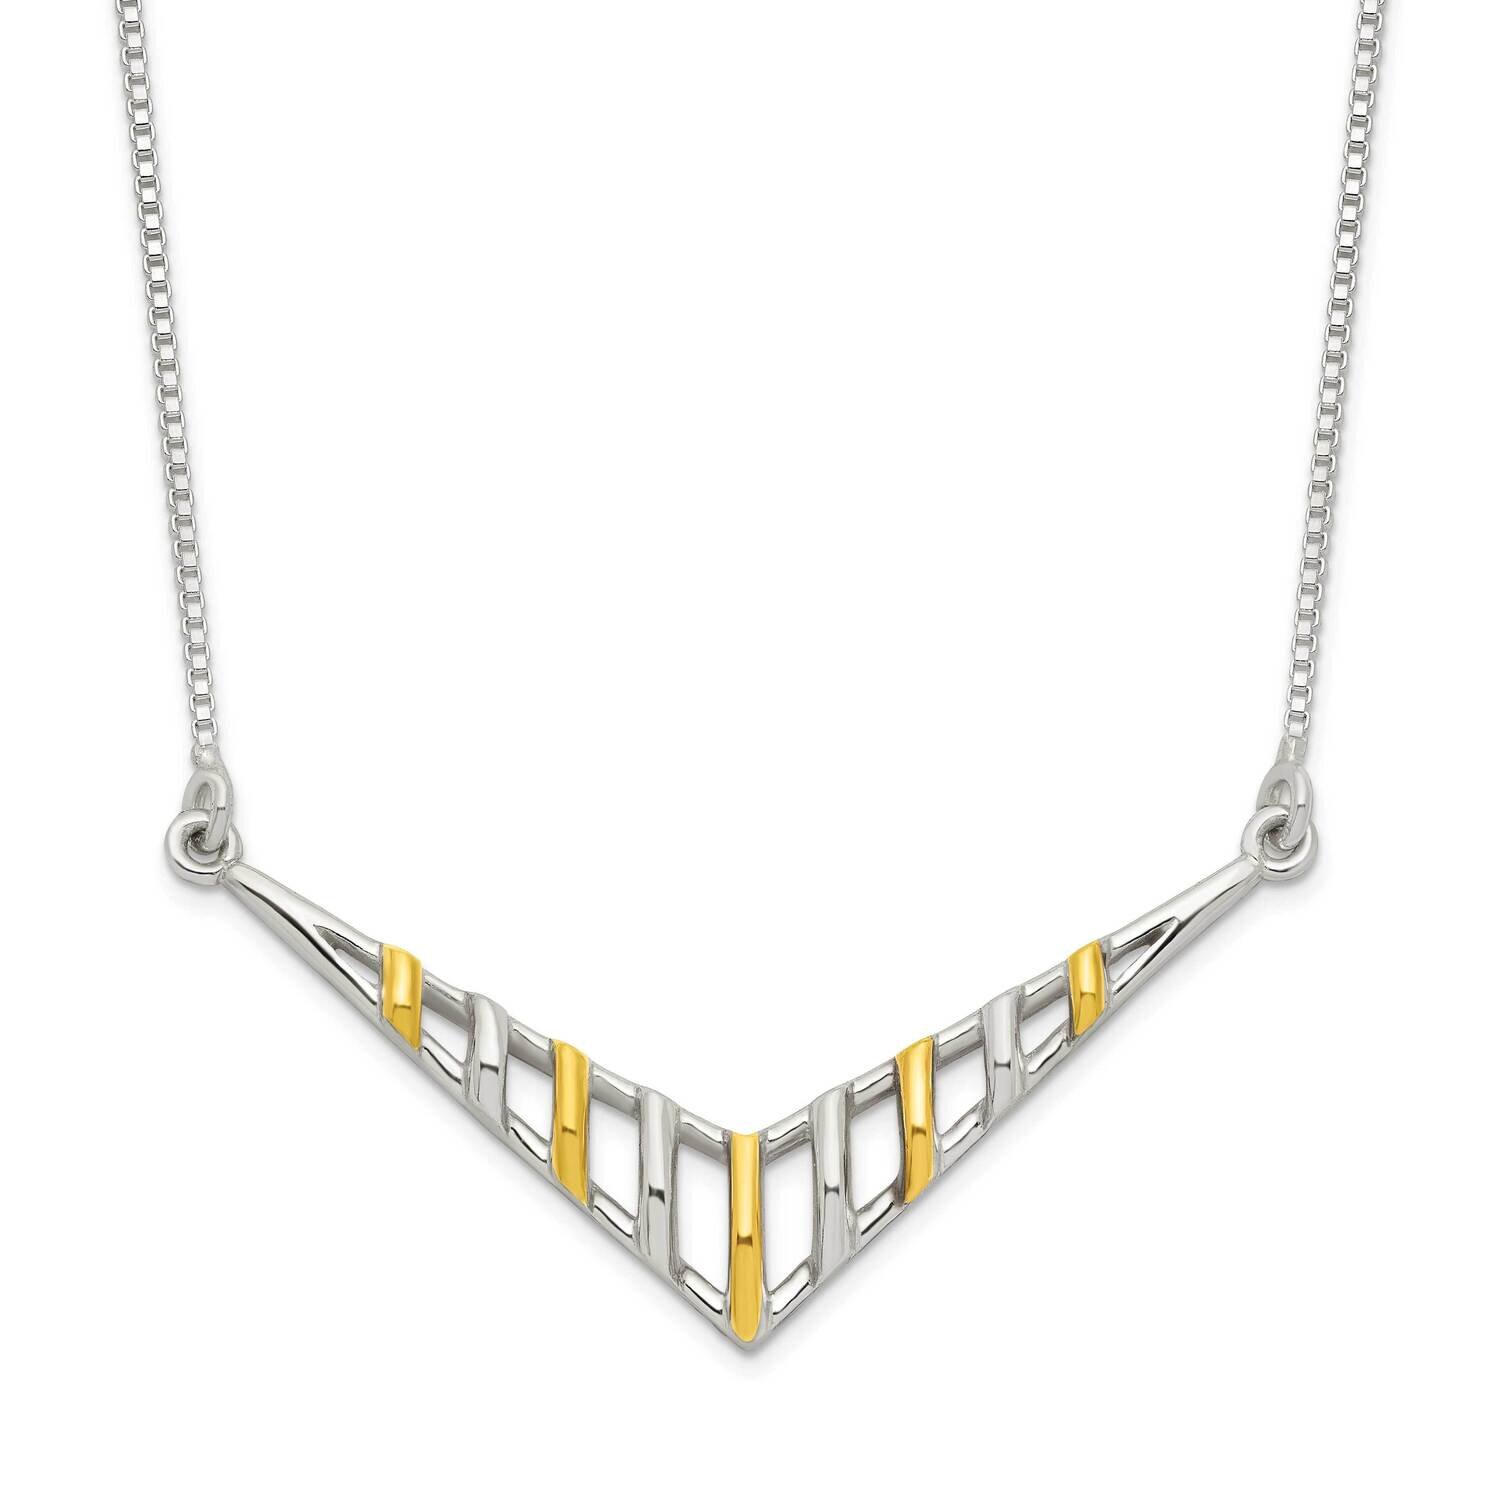 V-Shaped Bar Necklace 16 Inch Sterling Silver Gold-Tone QG6126-16